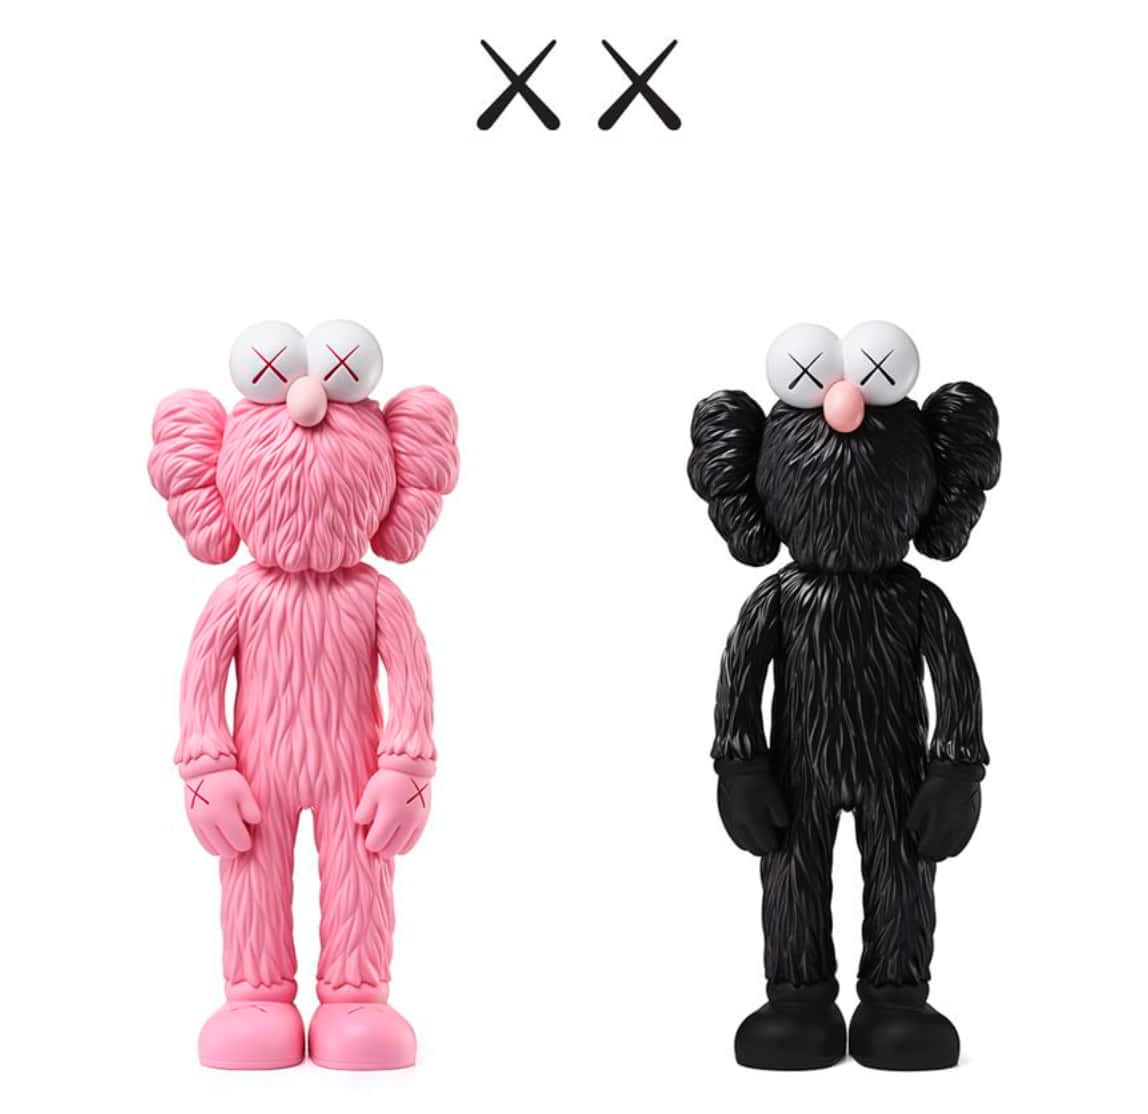 Kaws' signature art style is showcased in this vibrant pattern